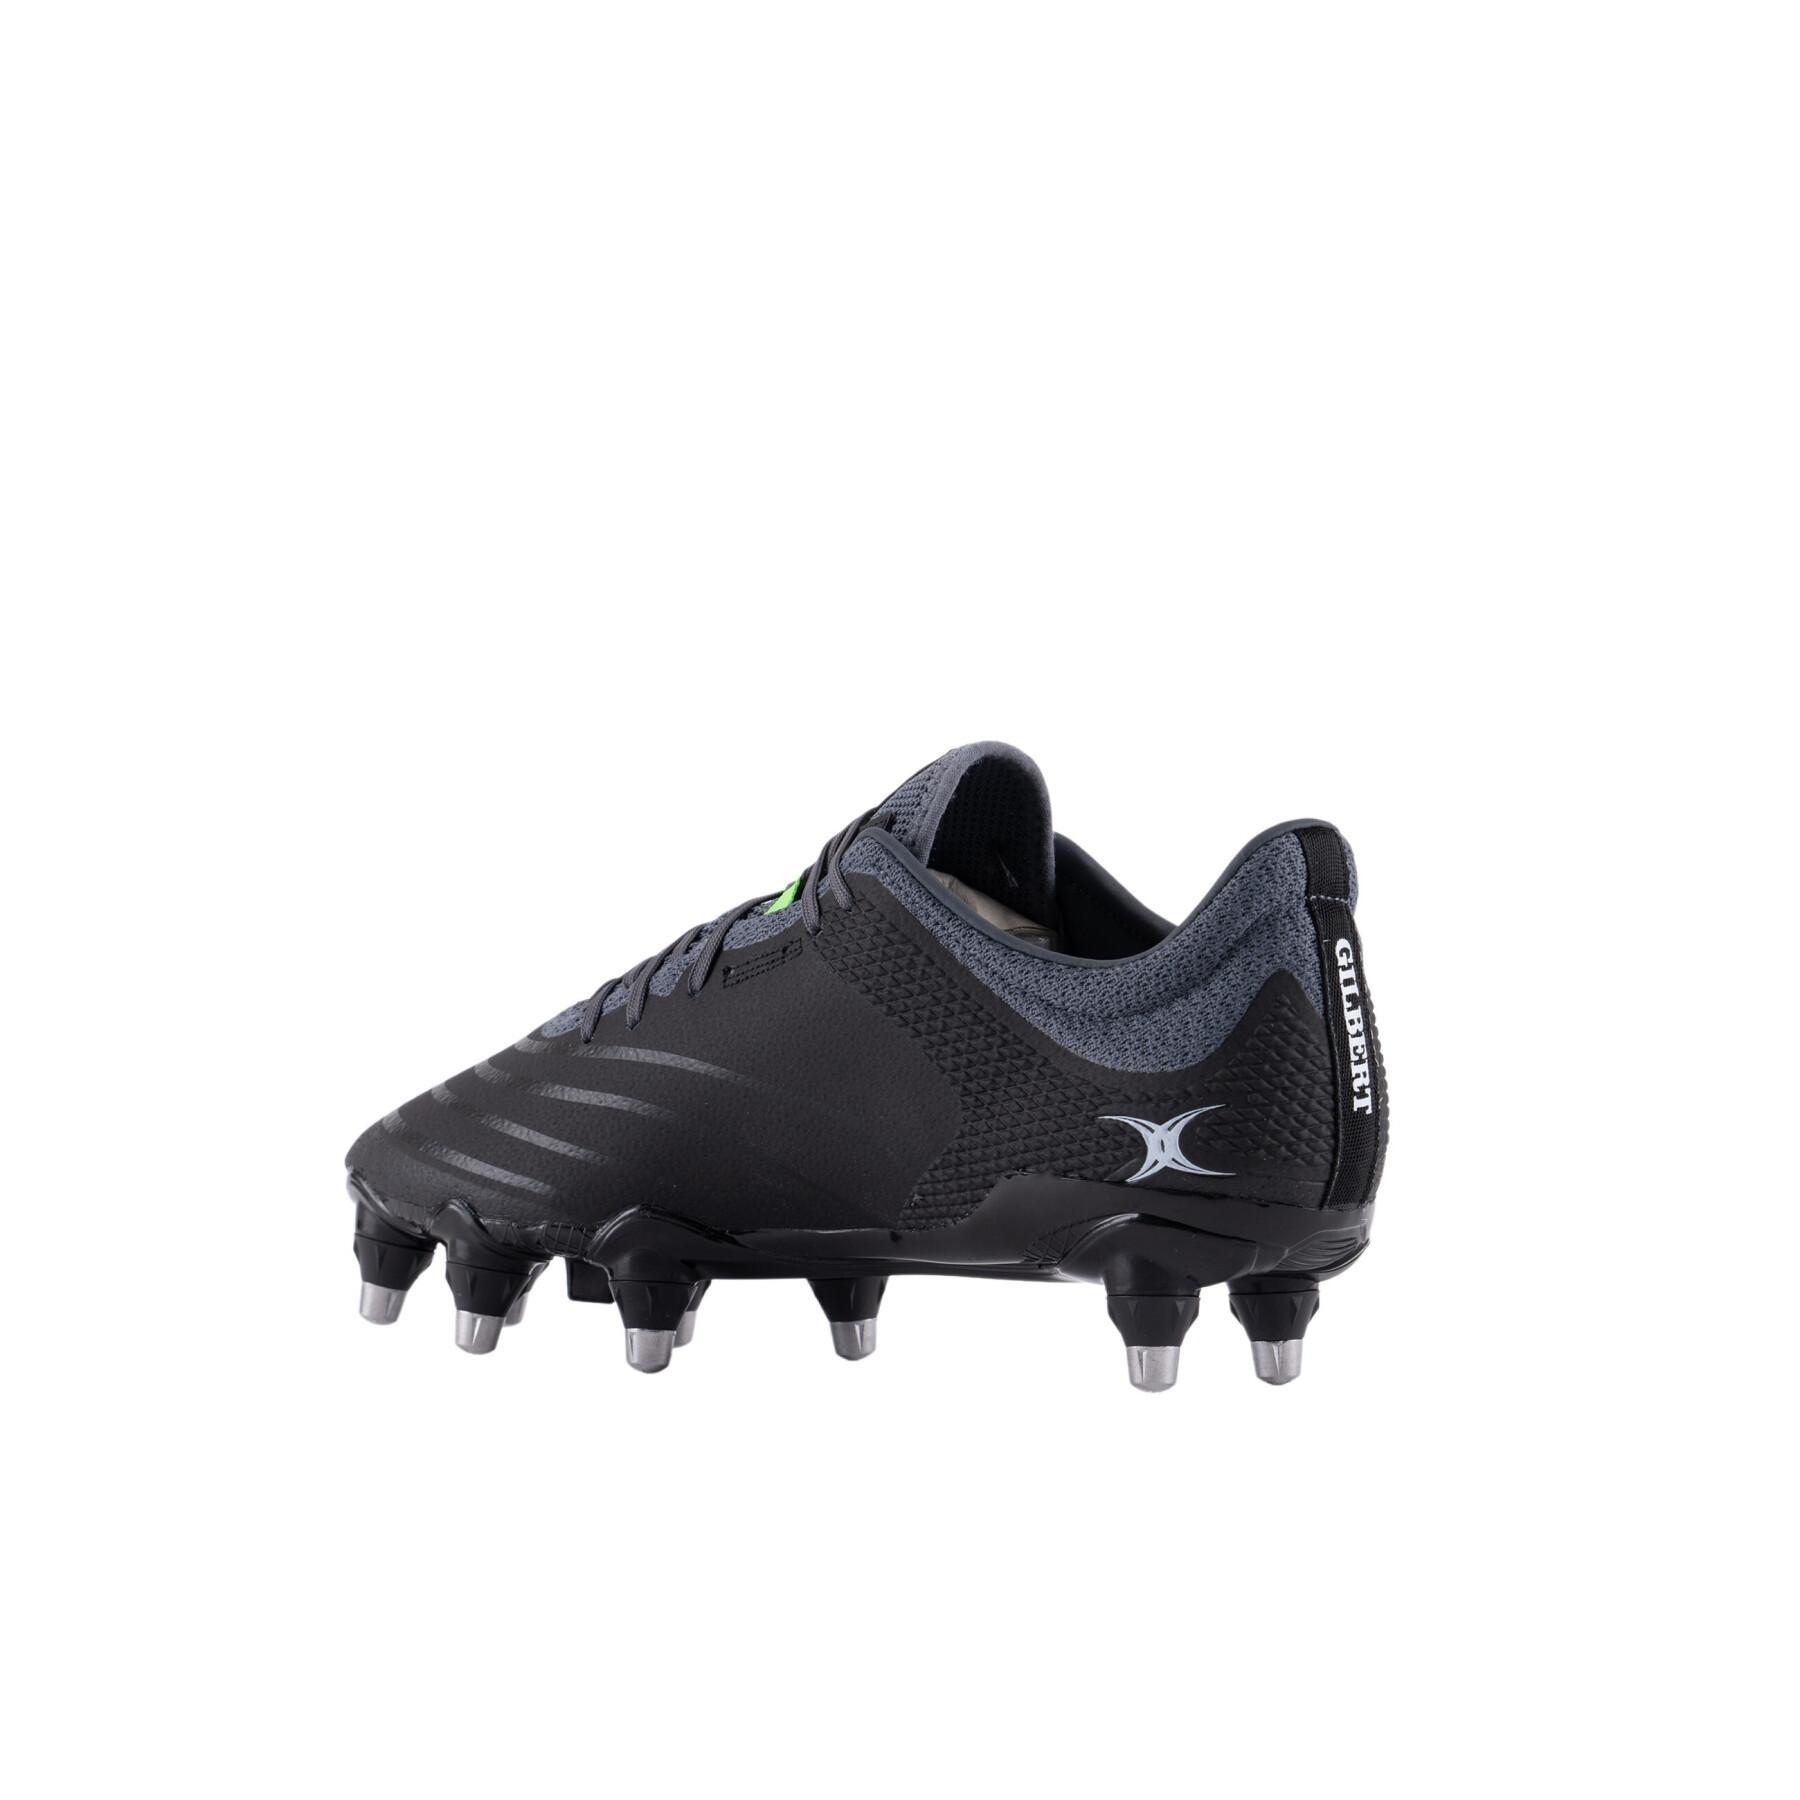 Chaussures de rugby Gilbert Kinetica Pro Pwr 8S